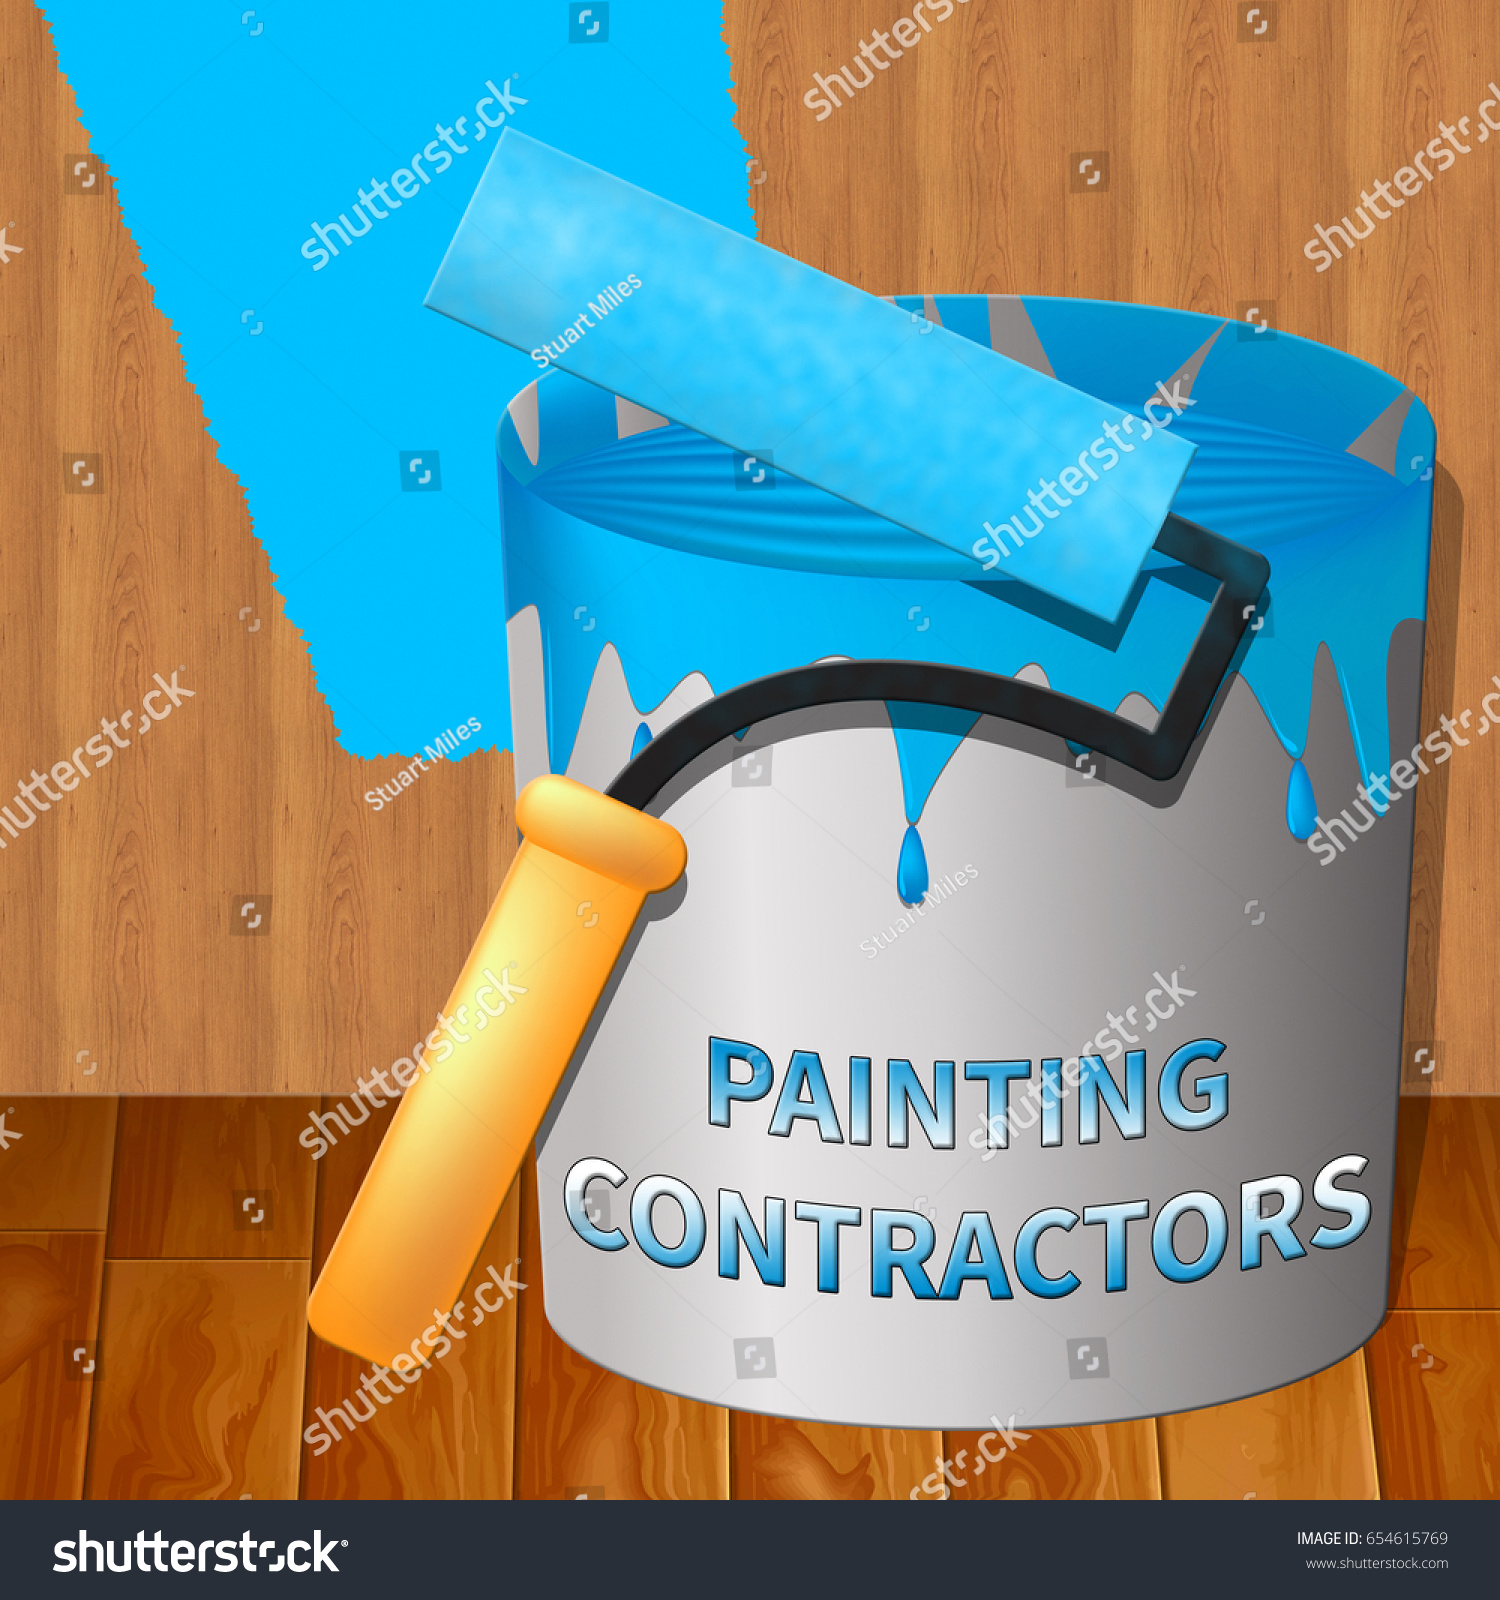 Painting Contractors Meaning Paint Contract 3d Stock Illustration